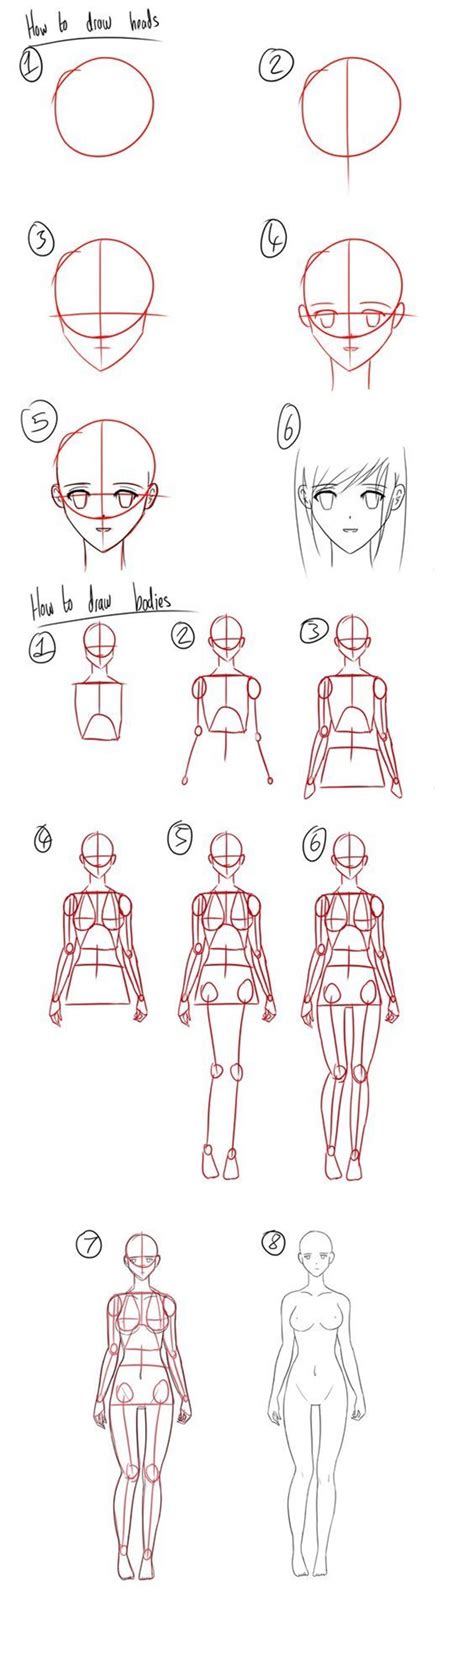 Create a free forum : How to Draw Anime Characters Step by Step (30 Examples)